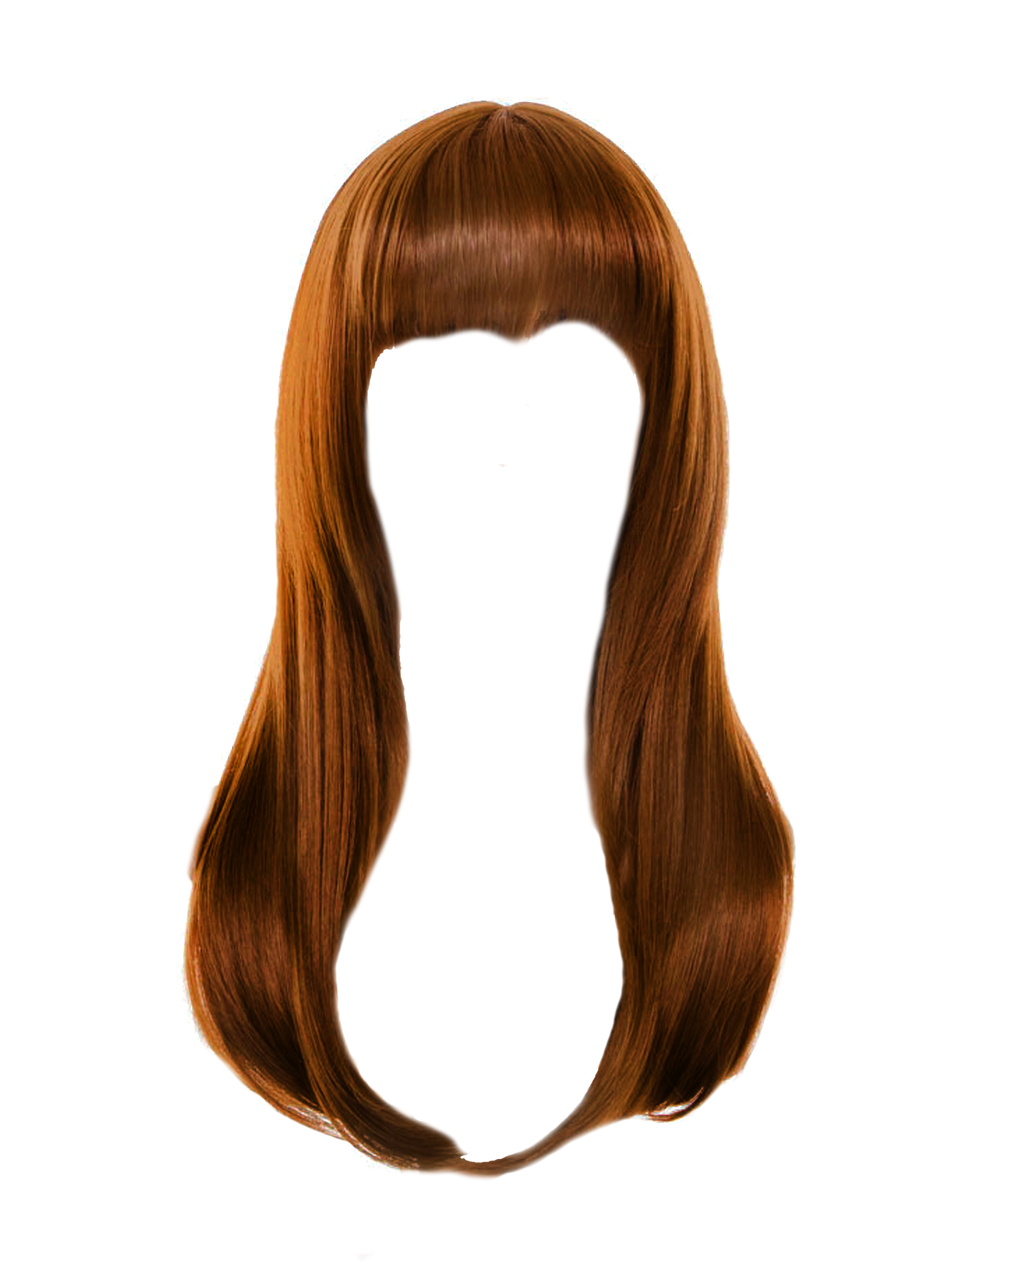 hairstyles png clipart for photoshop download - photo #11